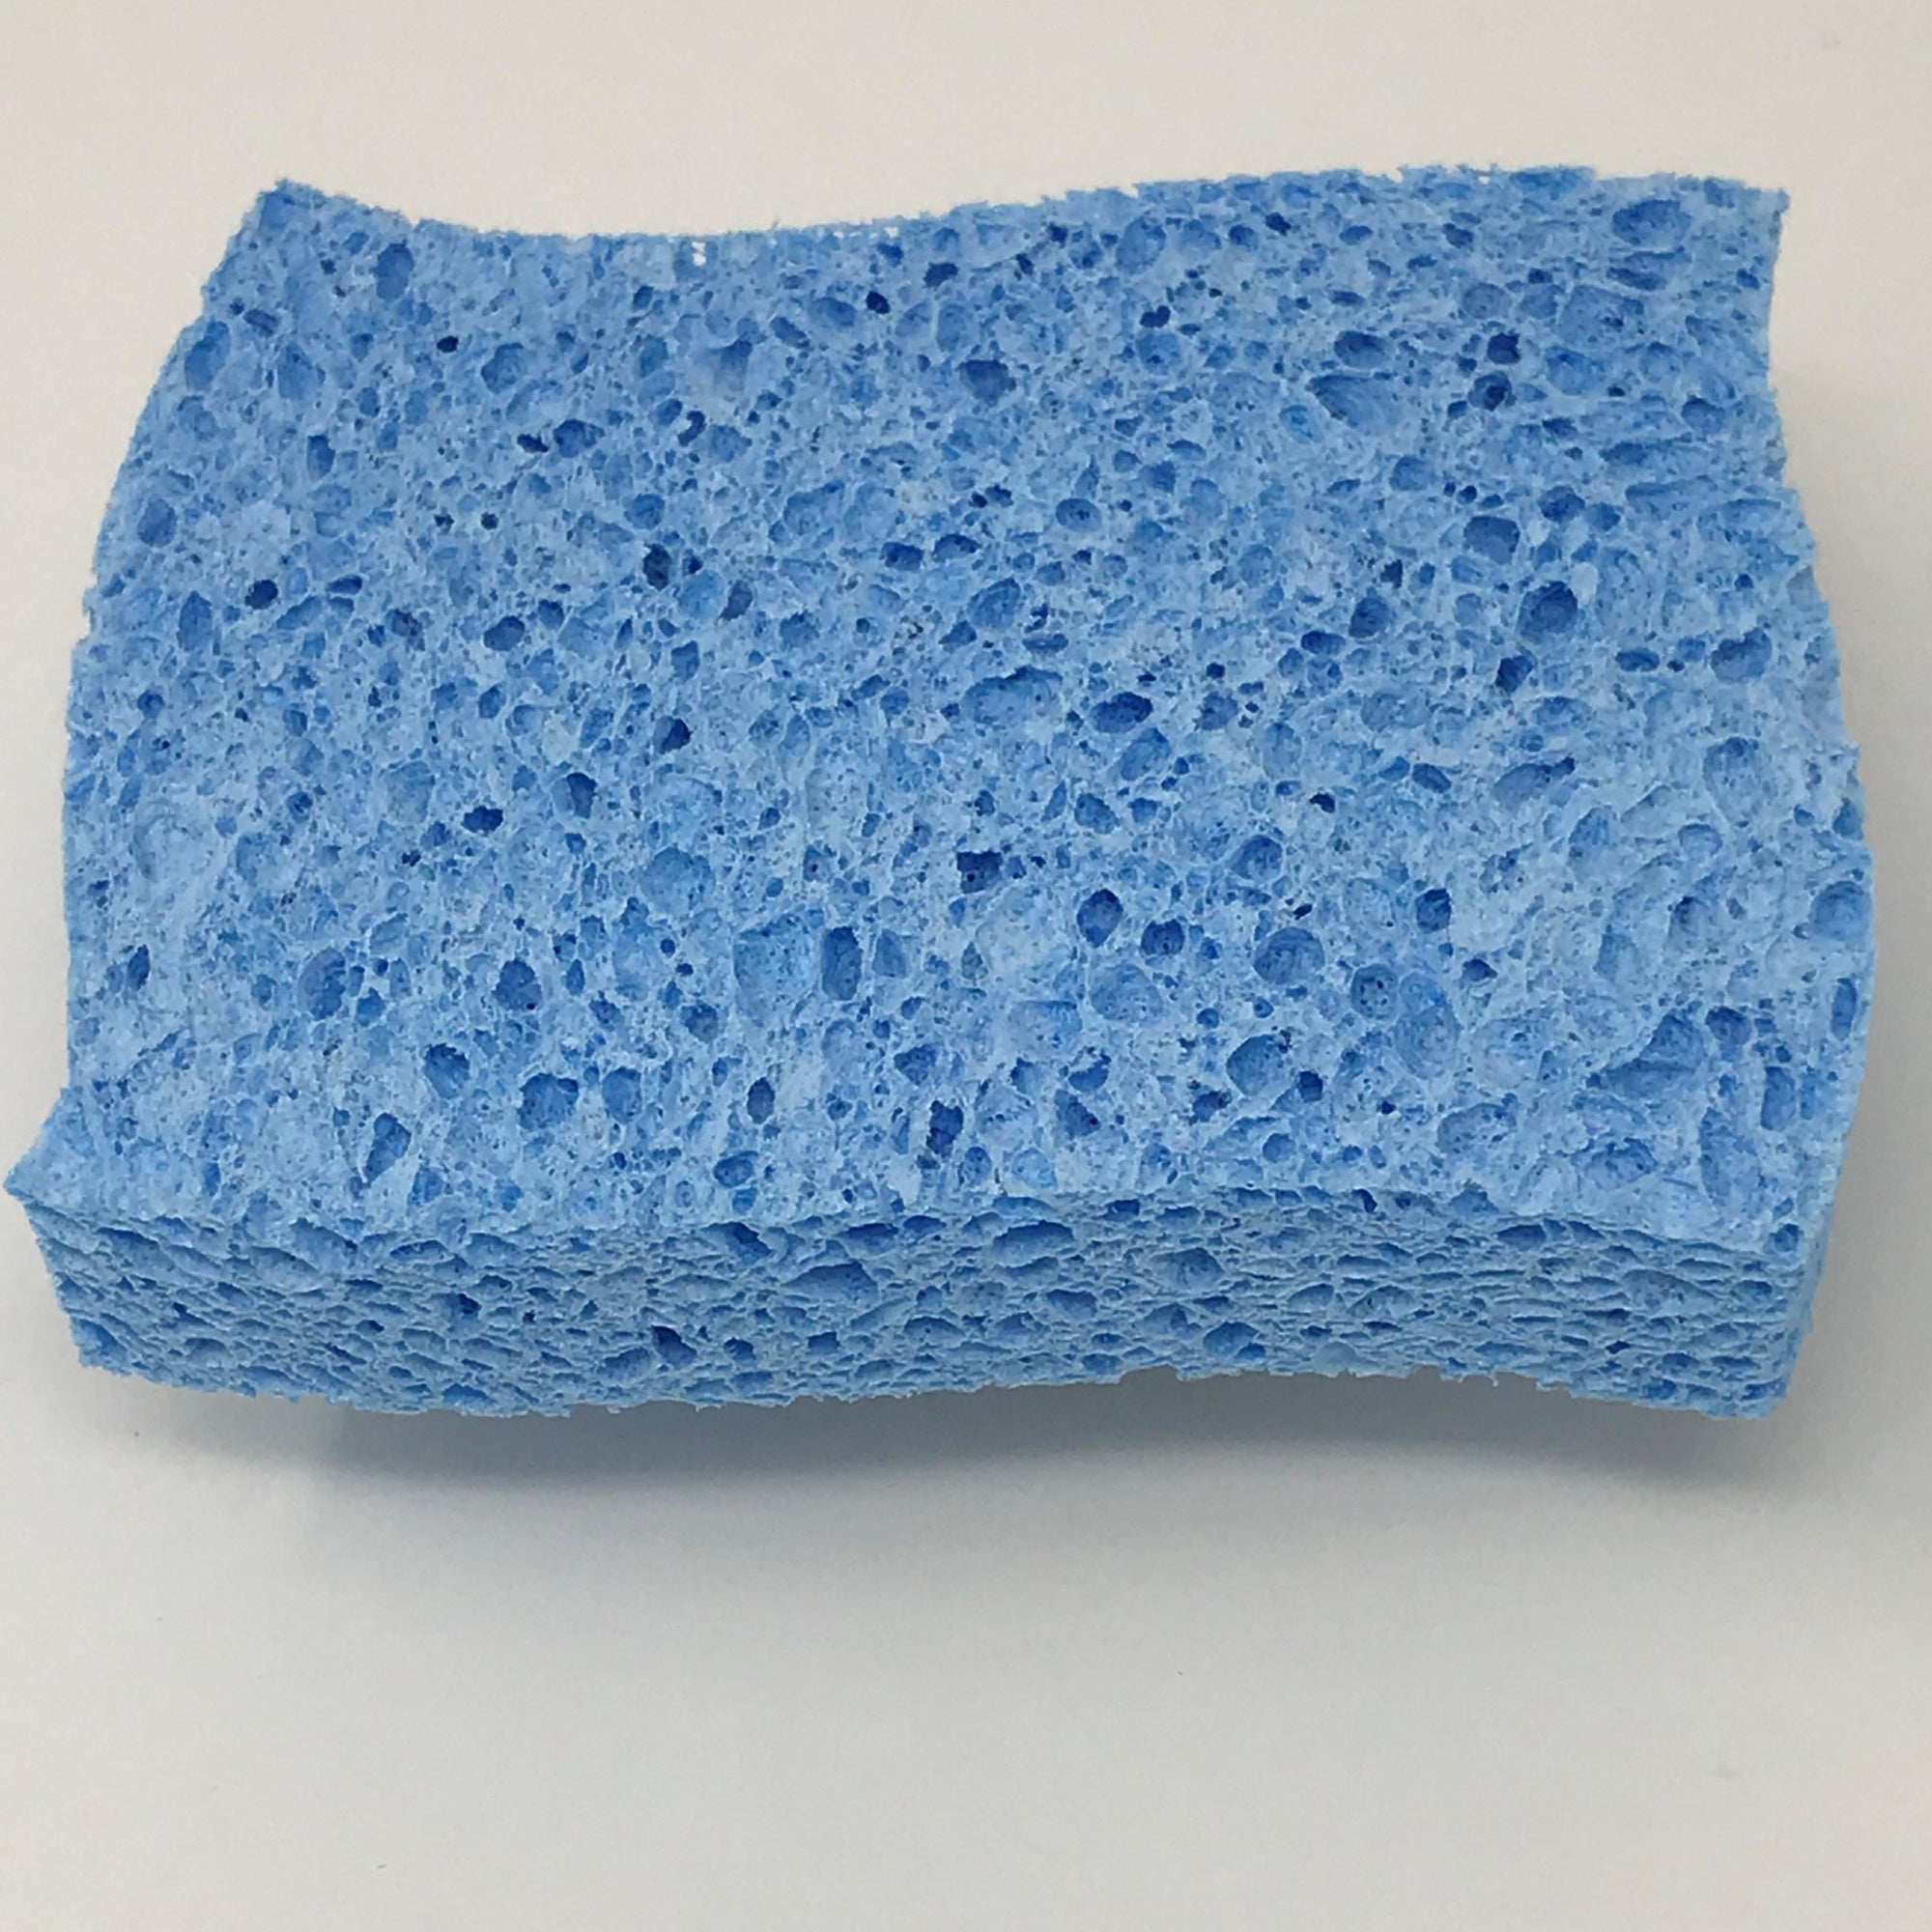 Ethical Earth EE101 Compostable Sponge Bathroom - Premium Scourers / Sponges from FMCG Global - Just $3.95! Shop now at W Hurst & Son (IW) Ltd